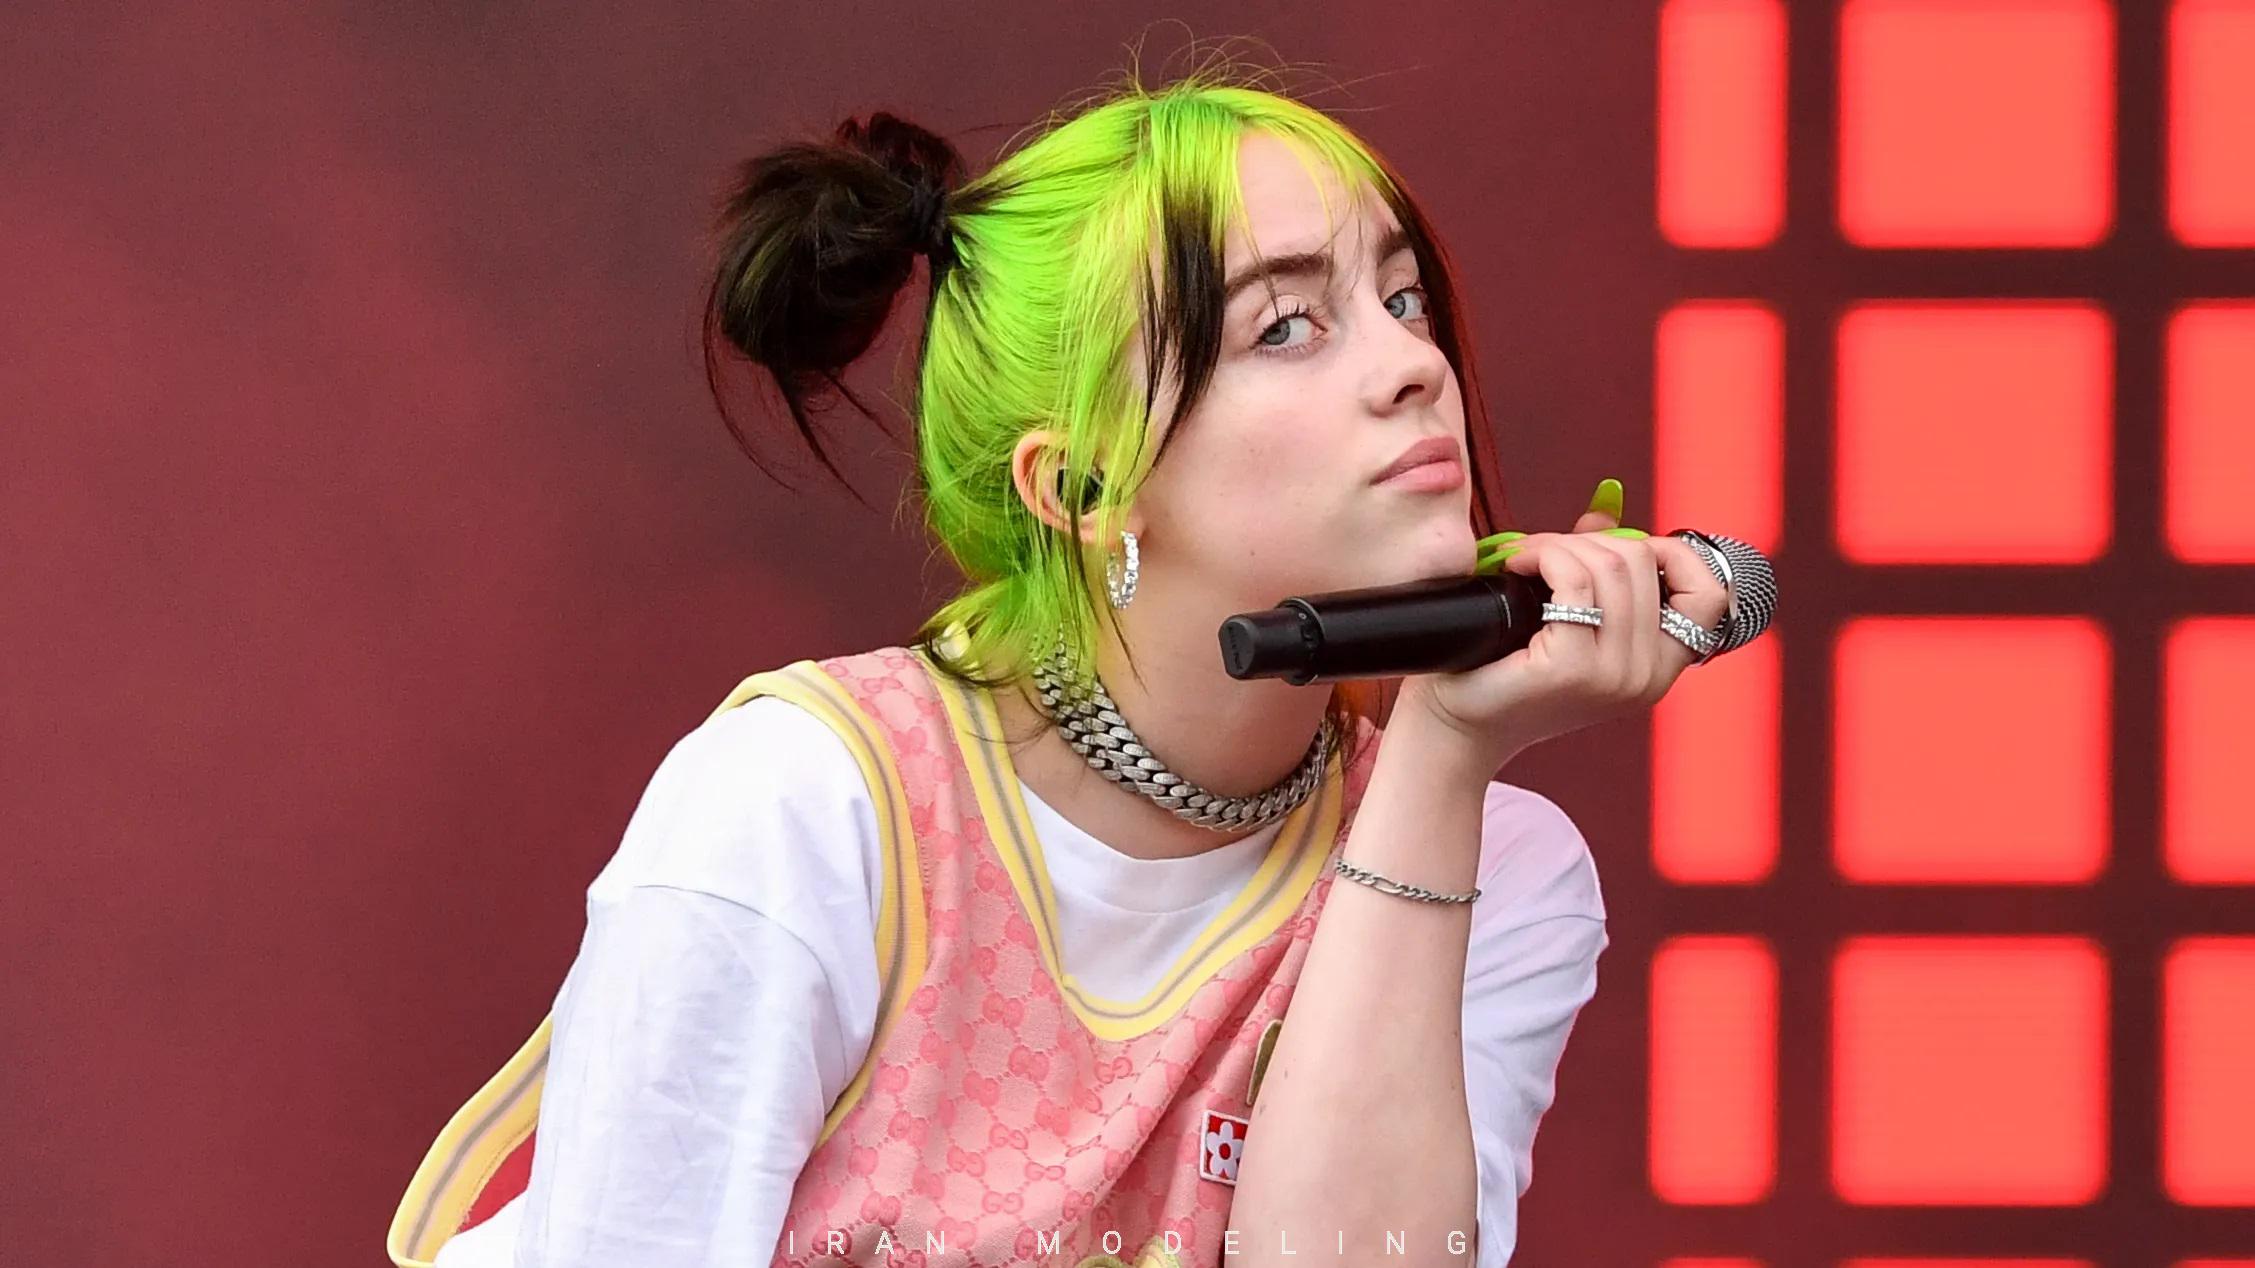 Billie Eilish's Blonde Hair Is the Most Dramatic Hair Change She's Ever Had - wide 6